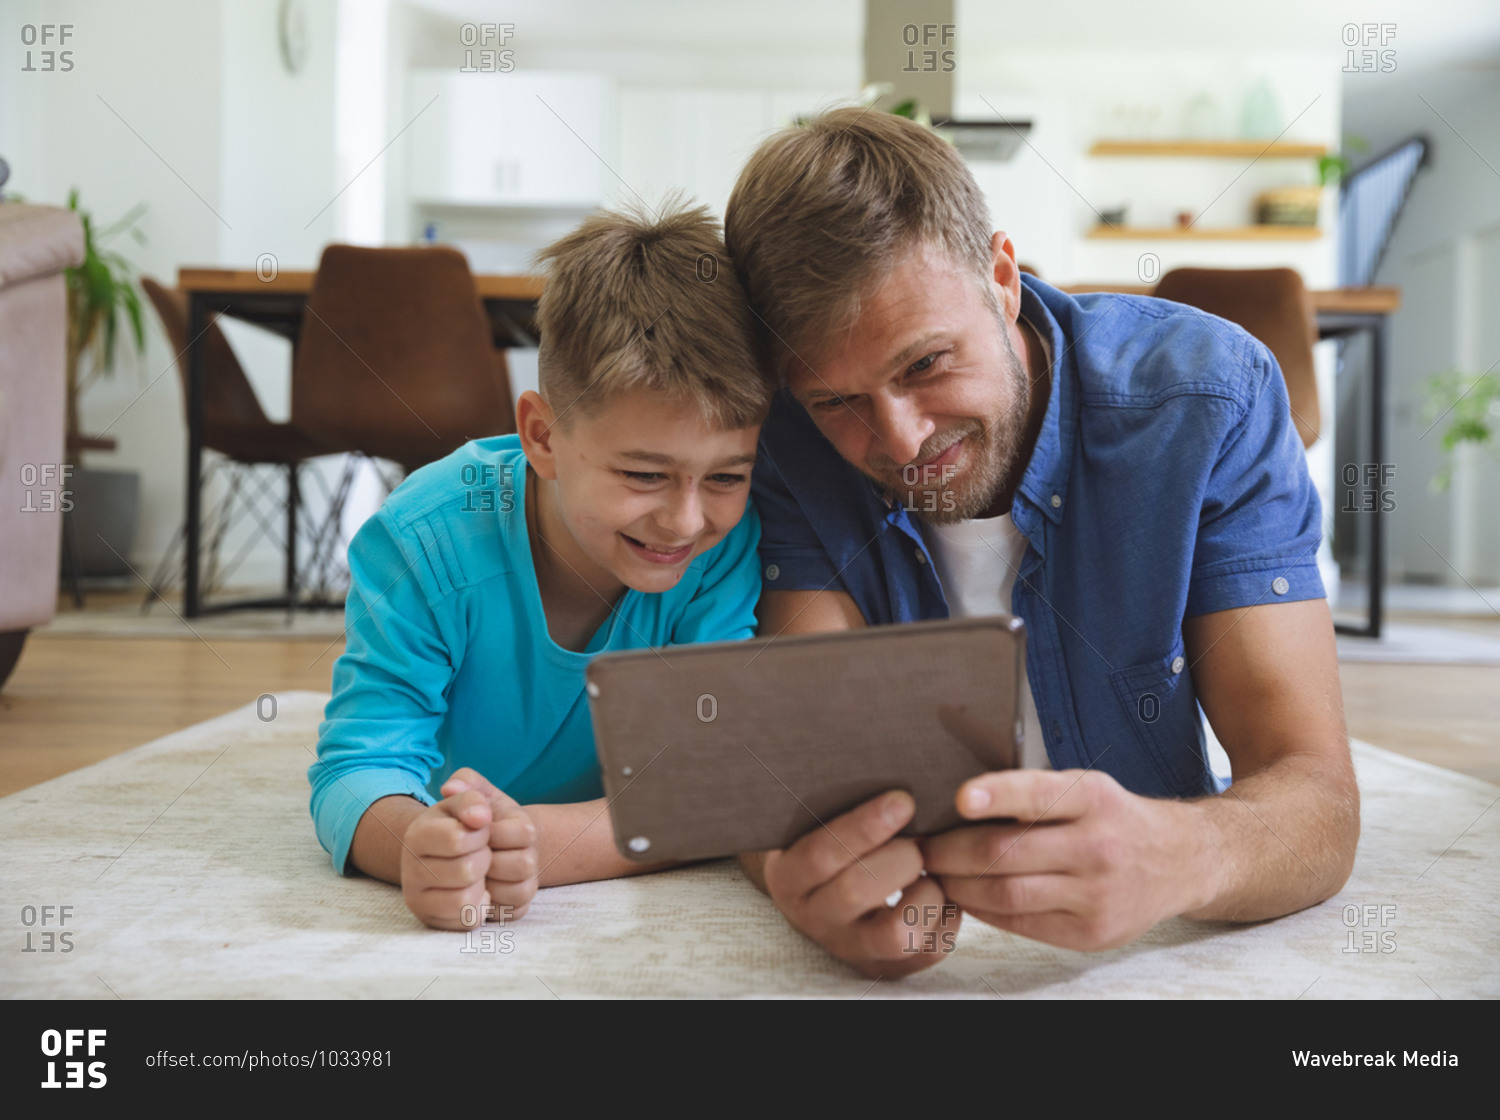 Caucasian man at home with his son together, lying on rug in living room, using digital tablet, smiling. Social distancing during Covid 19 Coronavirus quarantine lockdown.